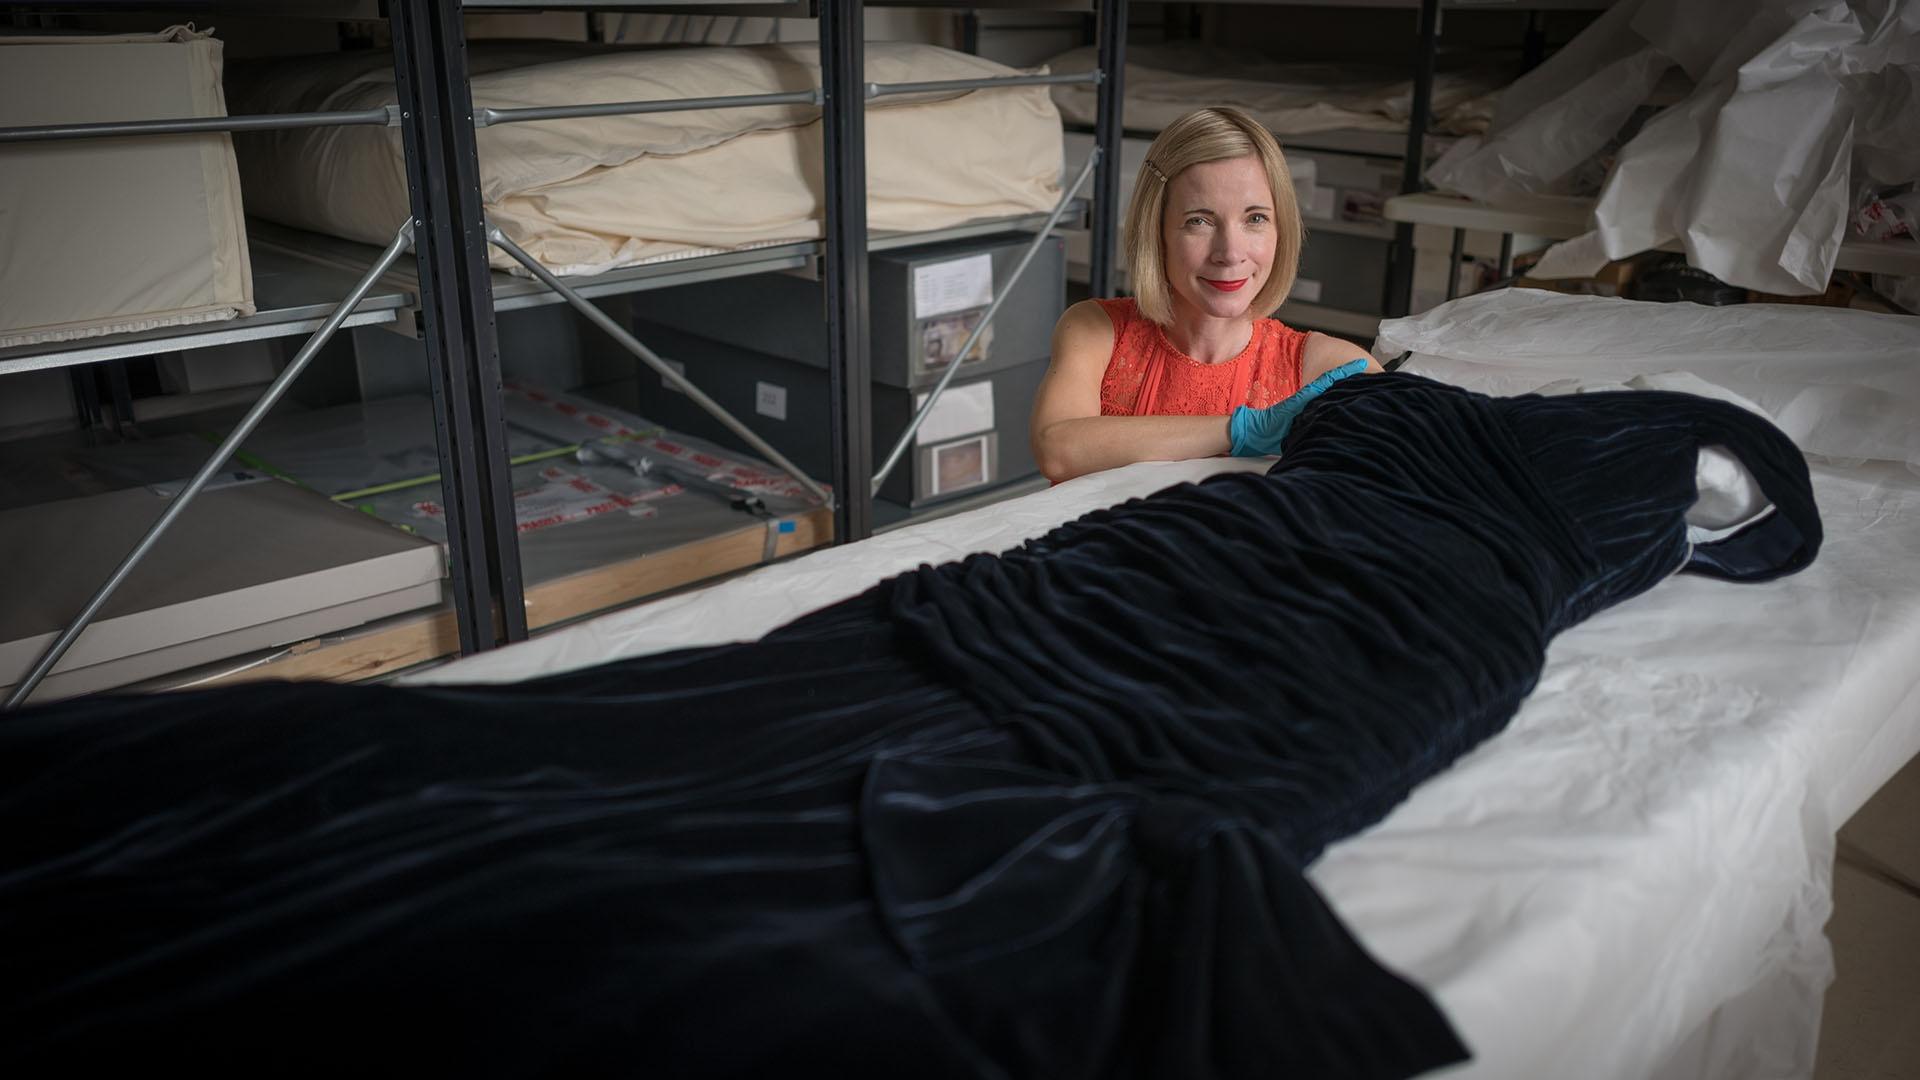 Lucy Worsley with the velvet dress worn by Princess Diana when she danced with John Travolta.